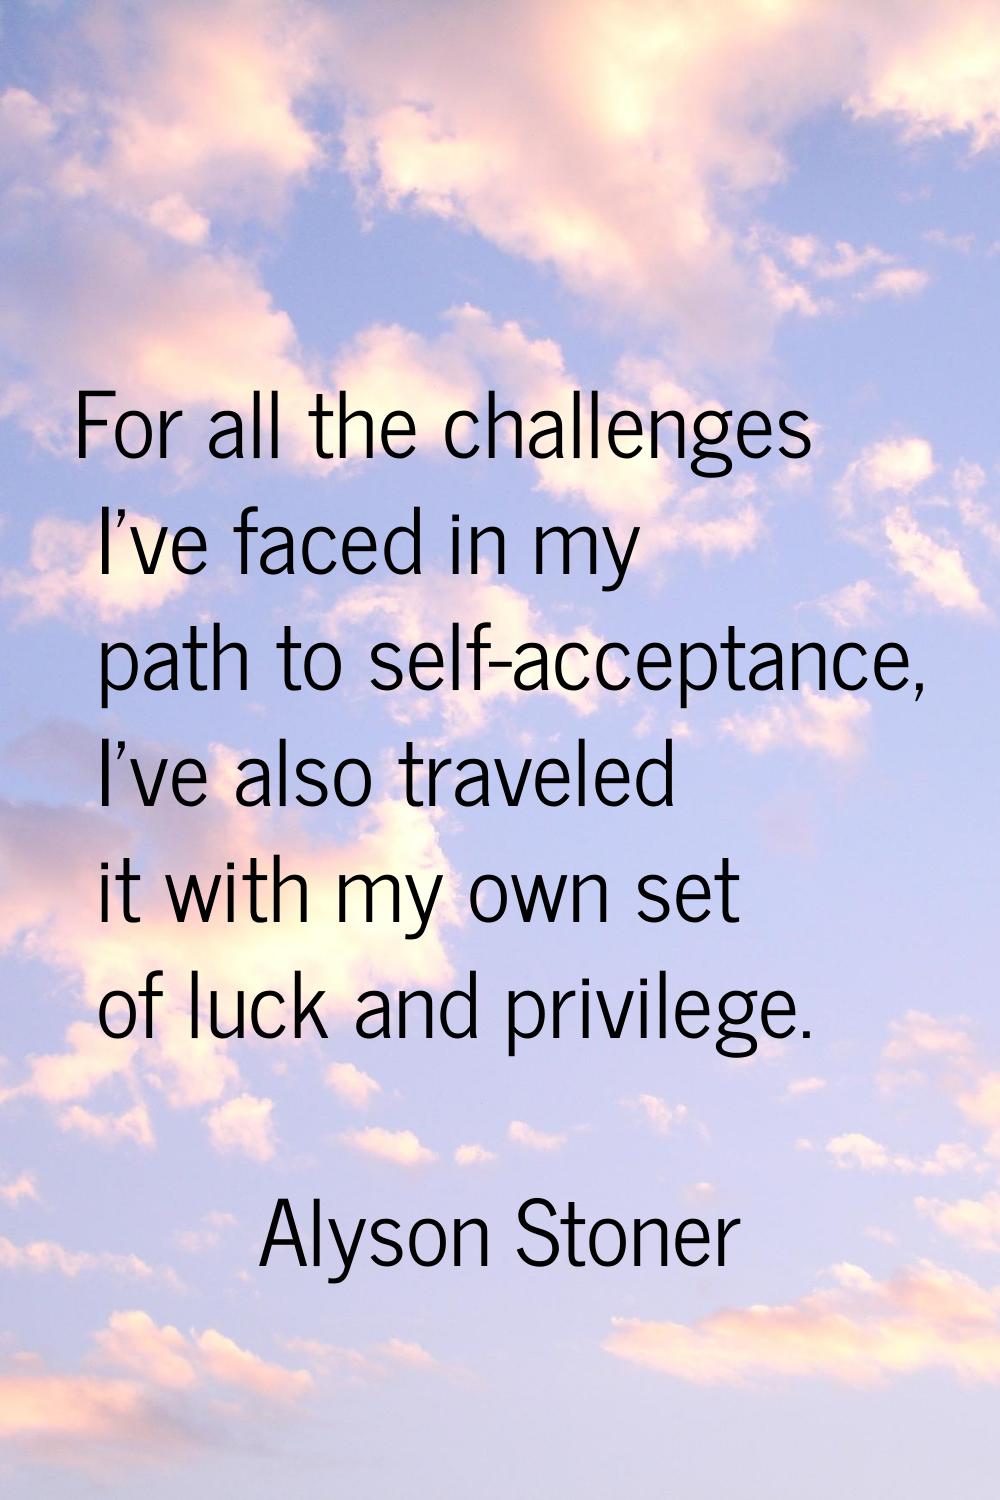 For all the challenges I've faced in my path to self-acceptance, I've also traveled it with my own 